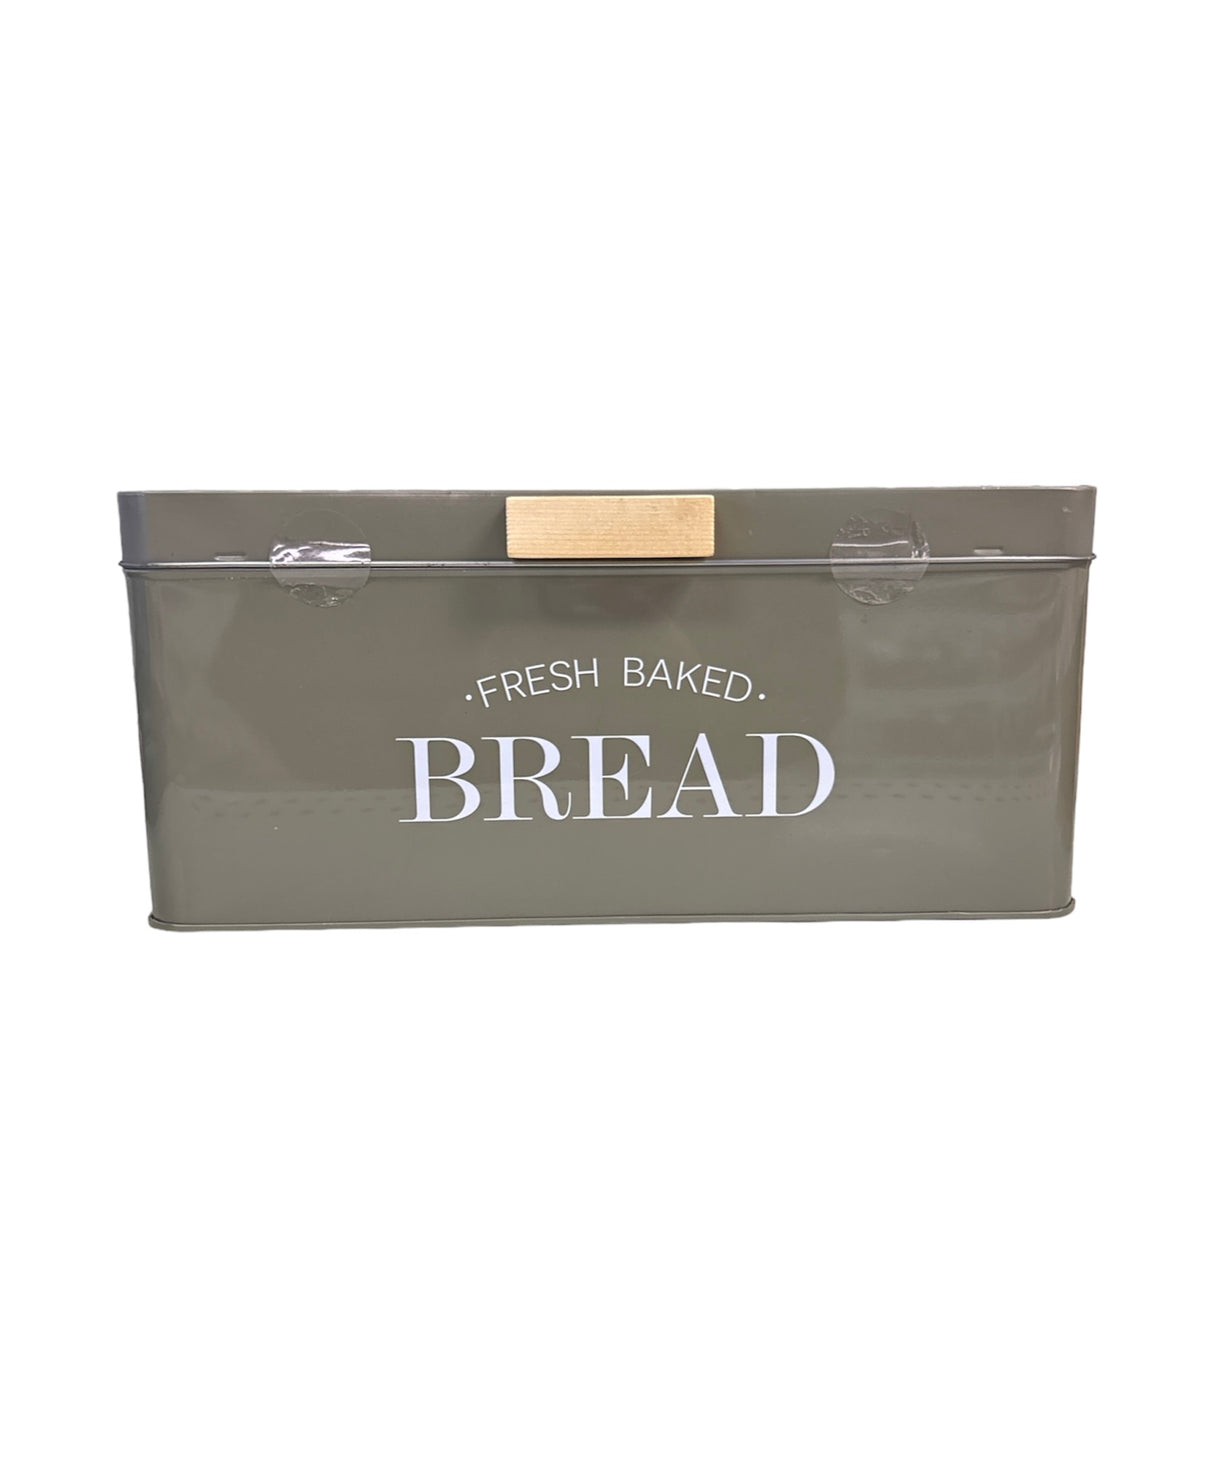 BREAD BOX FRESH BAKED BREAD CONTAINER